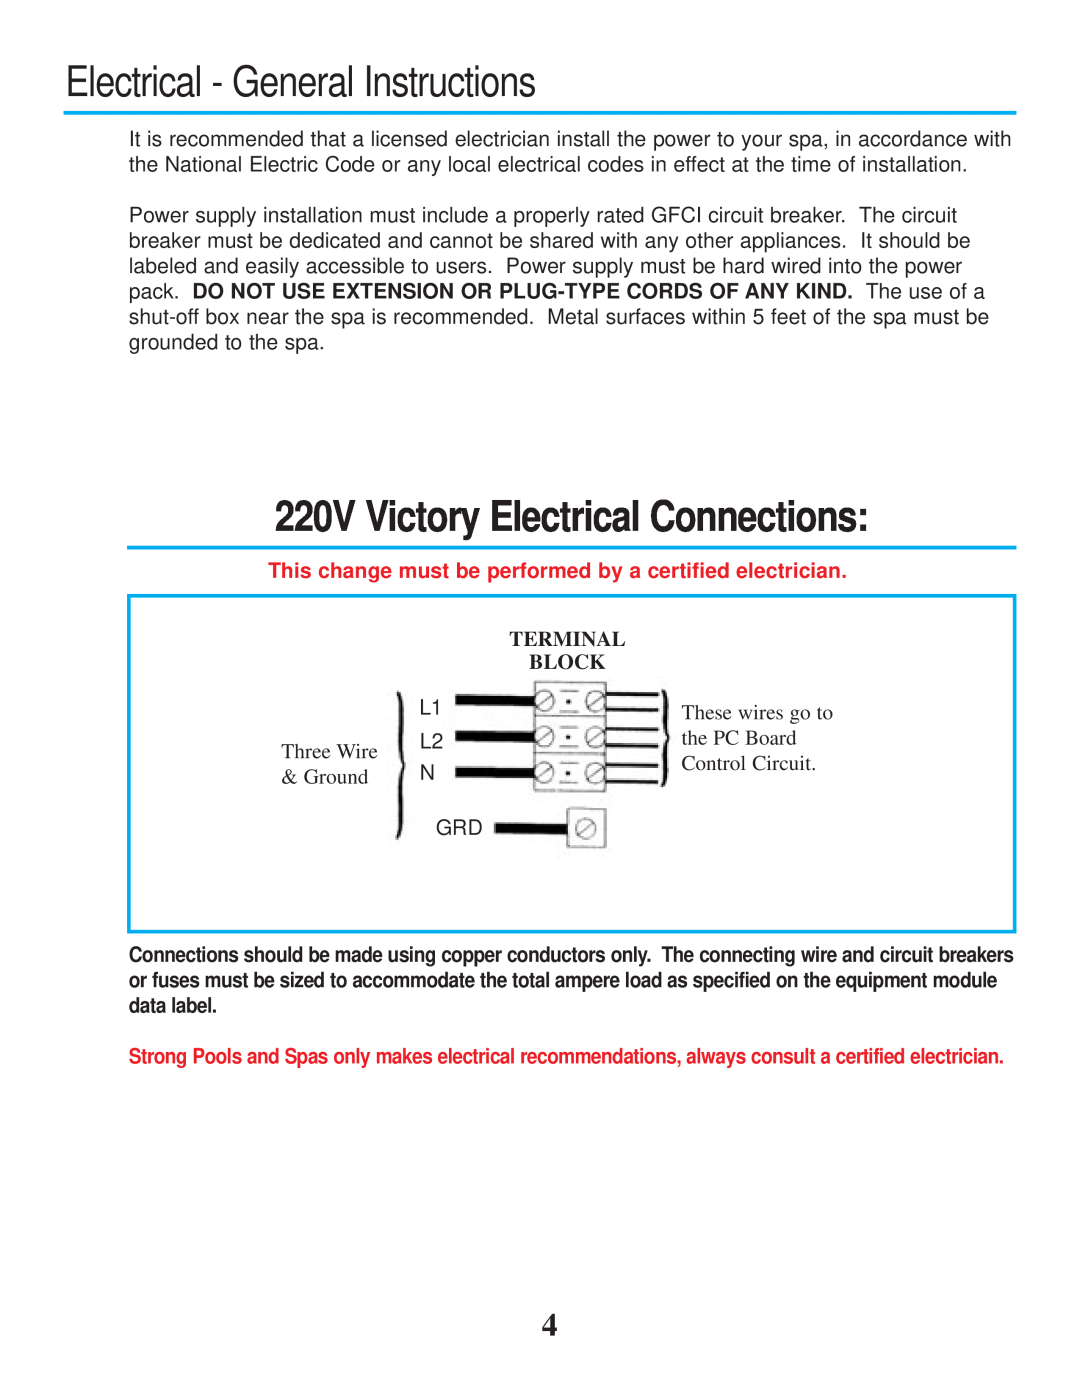 Strong Pools and Spas Victory Spa Electrical - General Instructions, 220V Victory Electrical Connections, Three Wire 